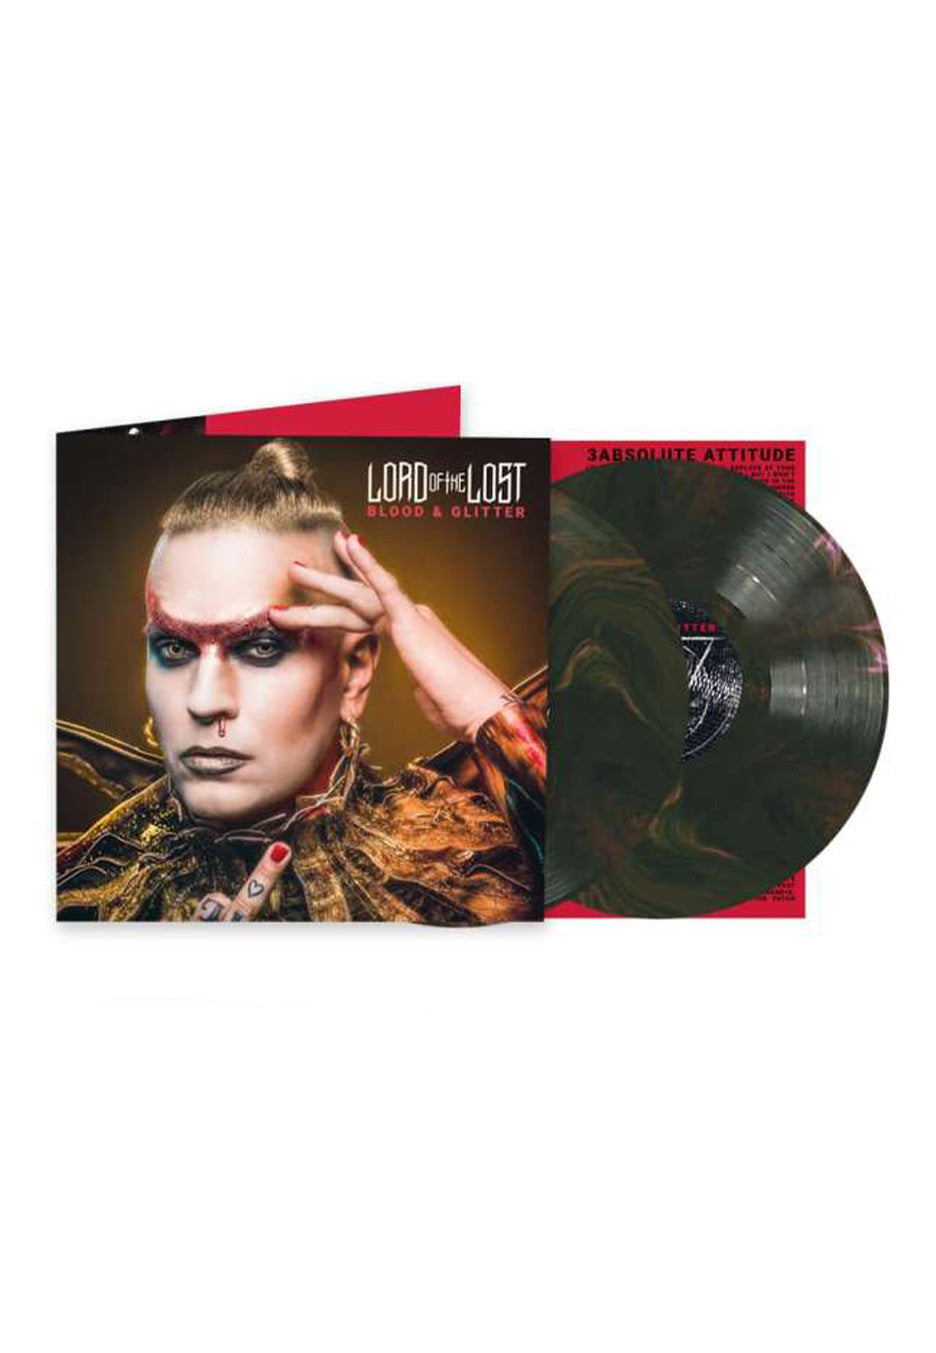 Lord Of The Lost - Blood & Glitter Ltd. Recycled - Colored 2 Vinyl